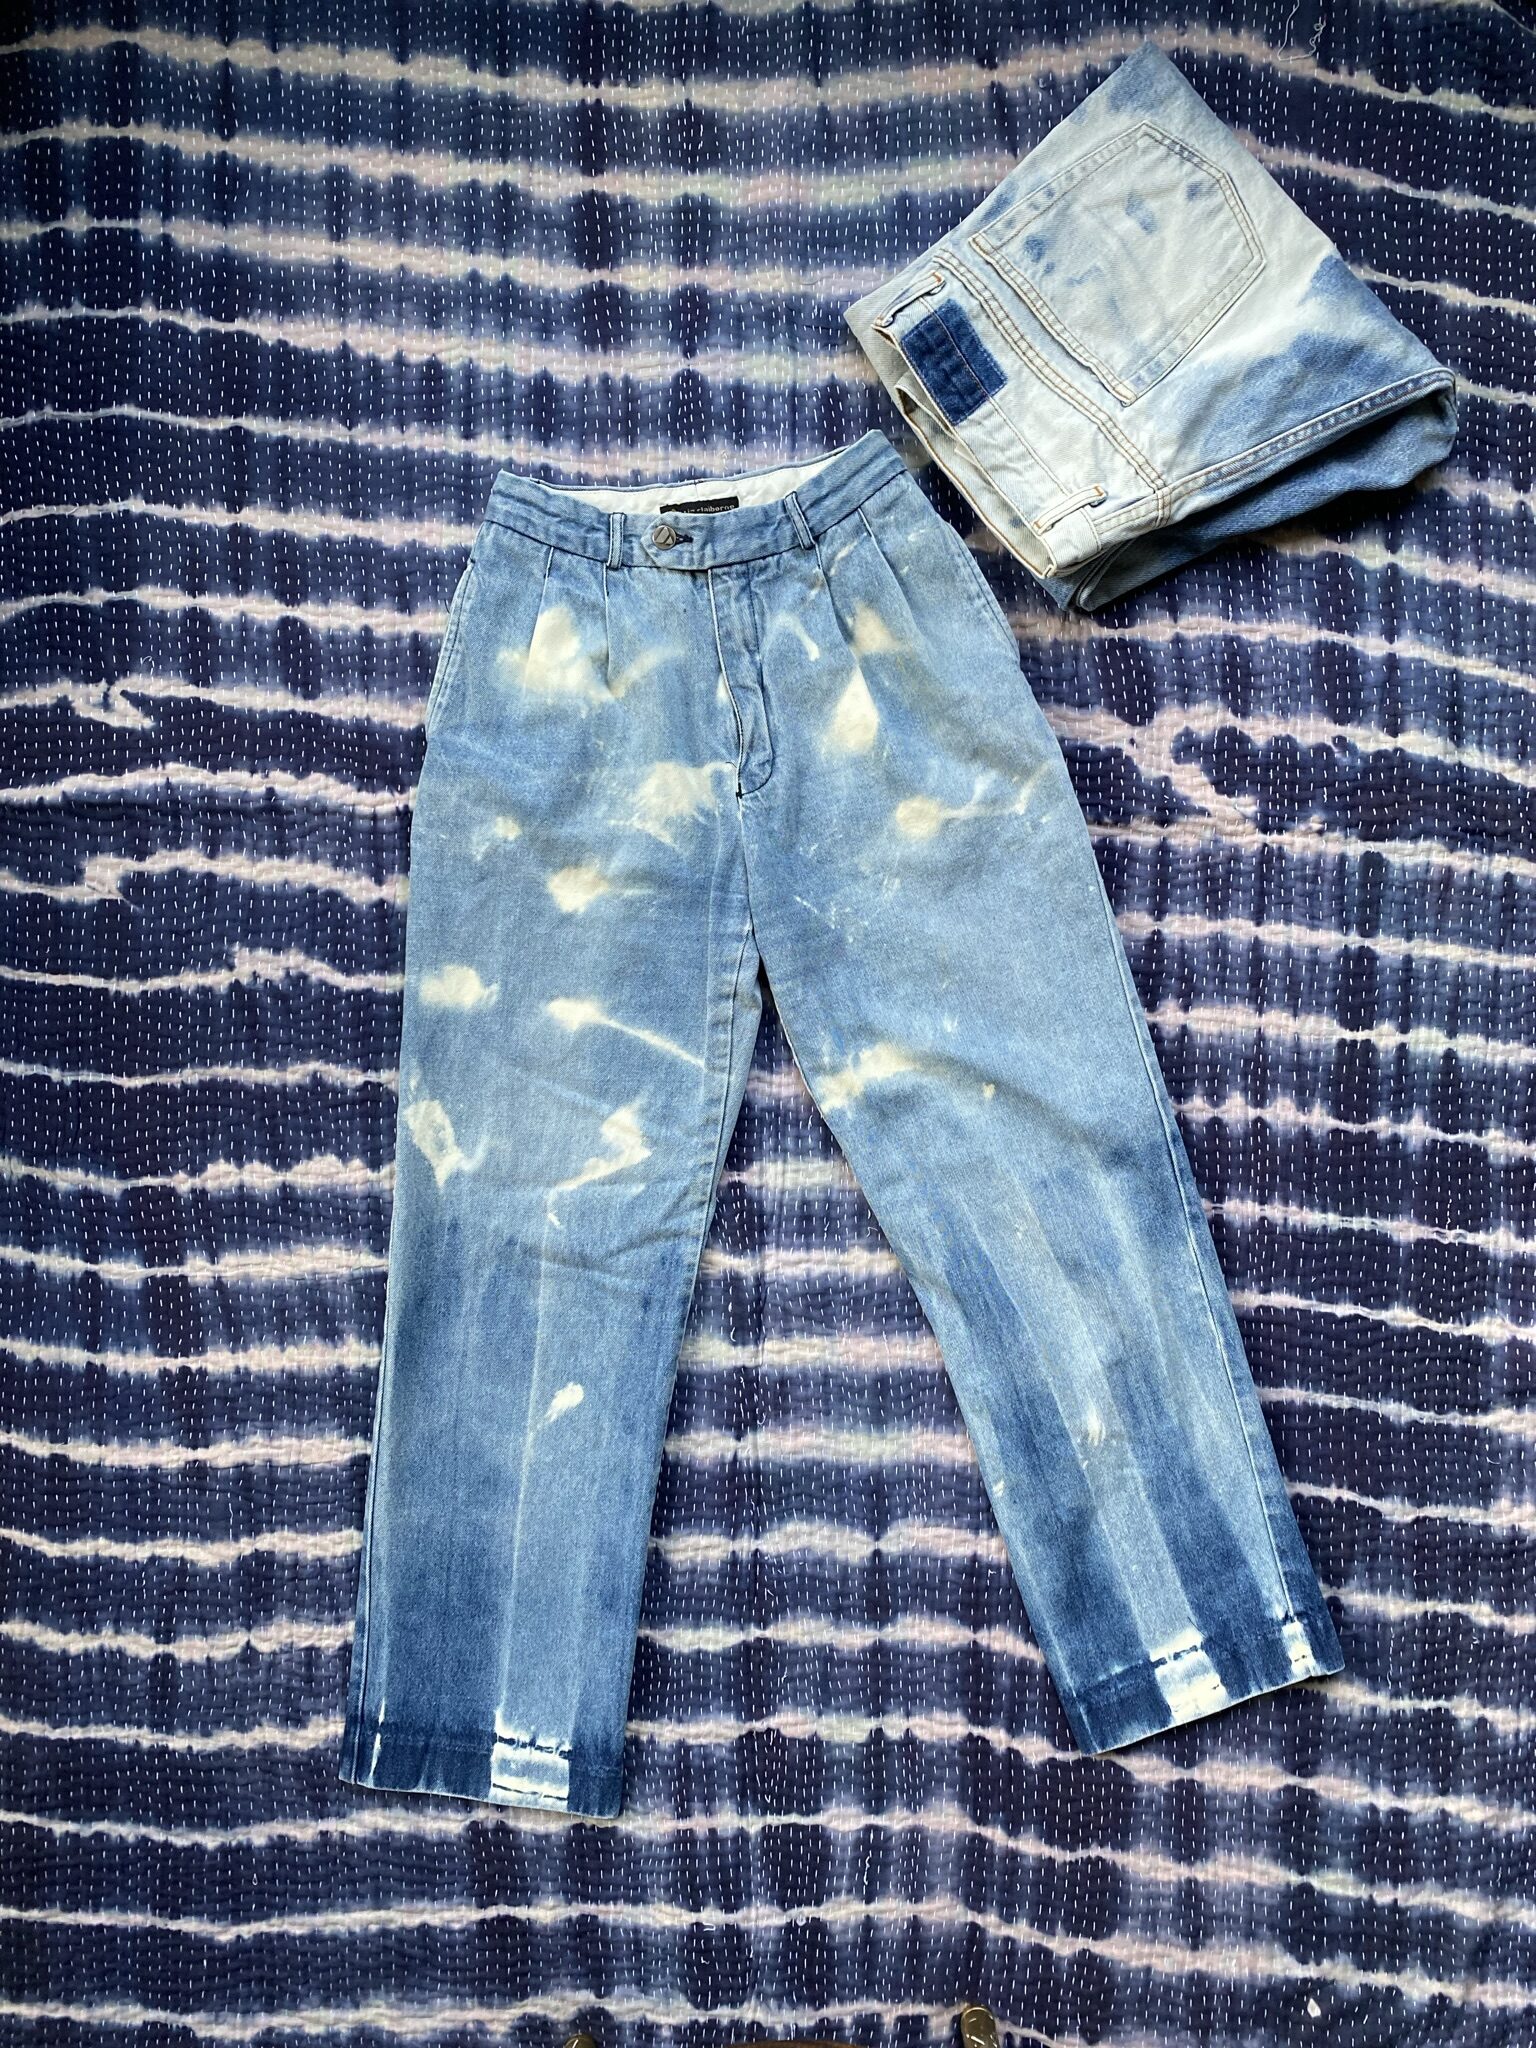 A pair of bleached blue jeans on a bed indigo tie dyed blanket.